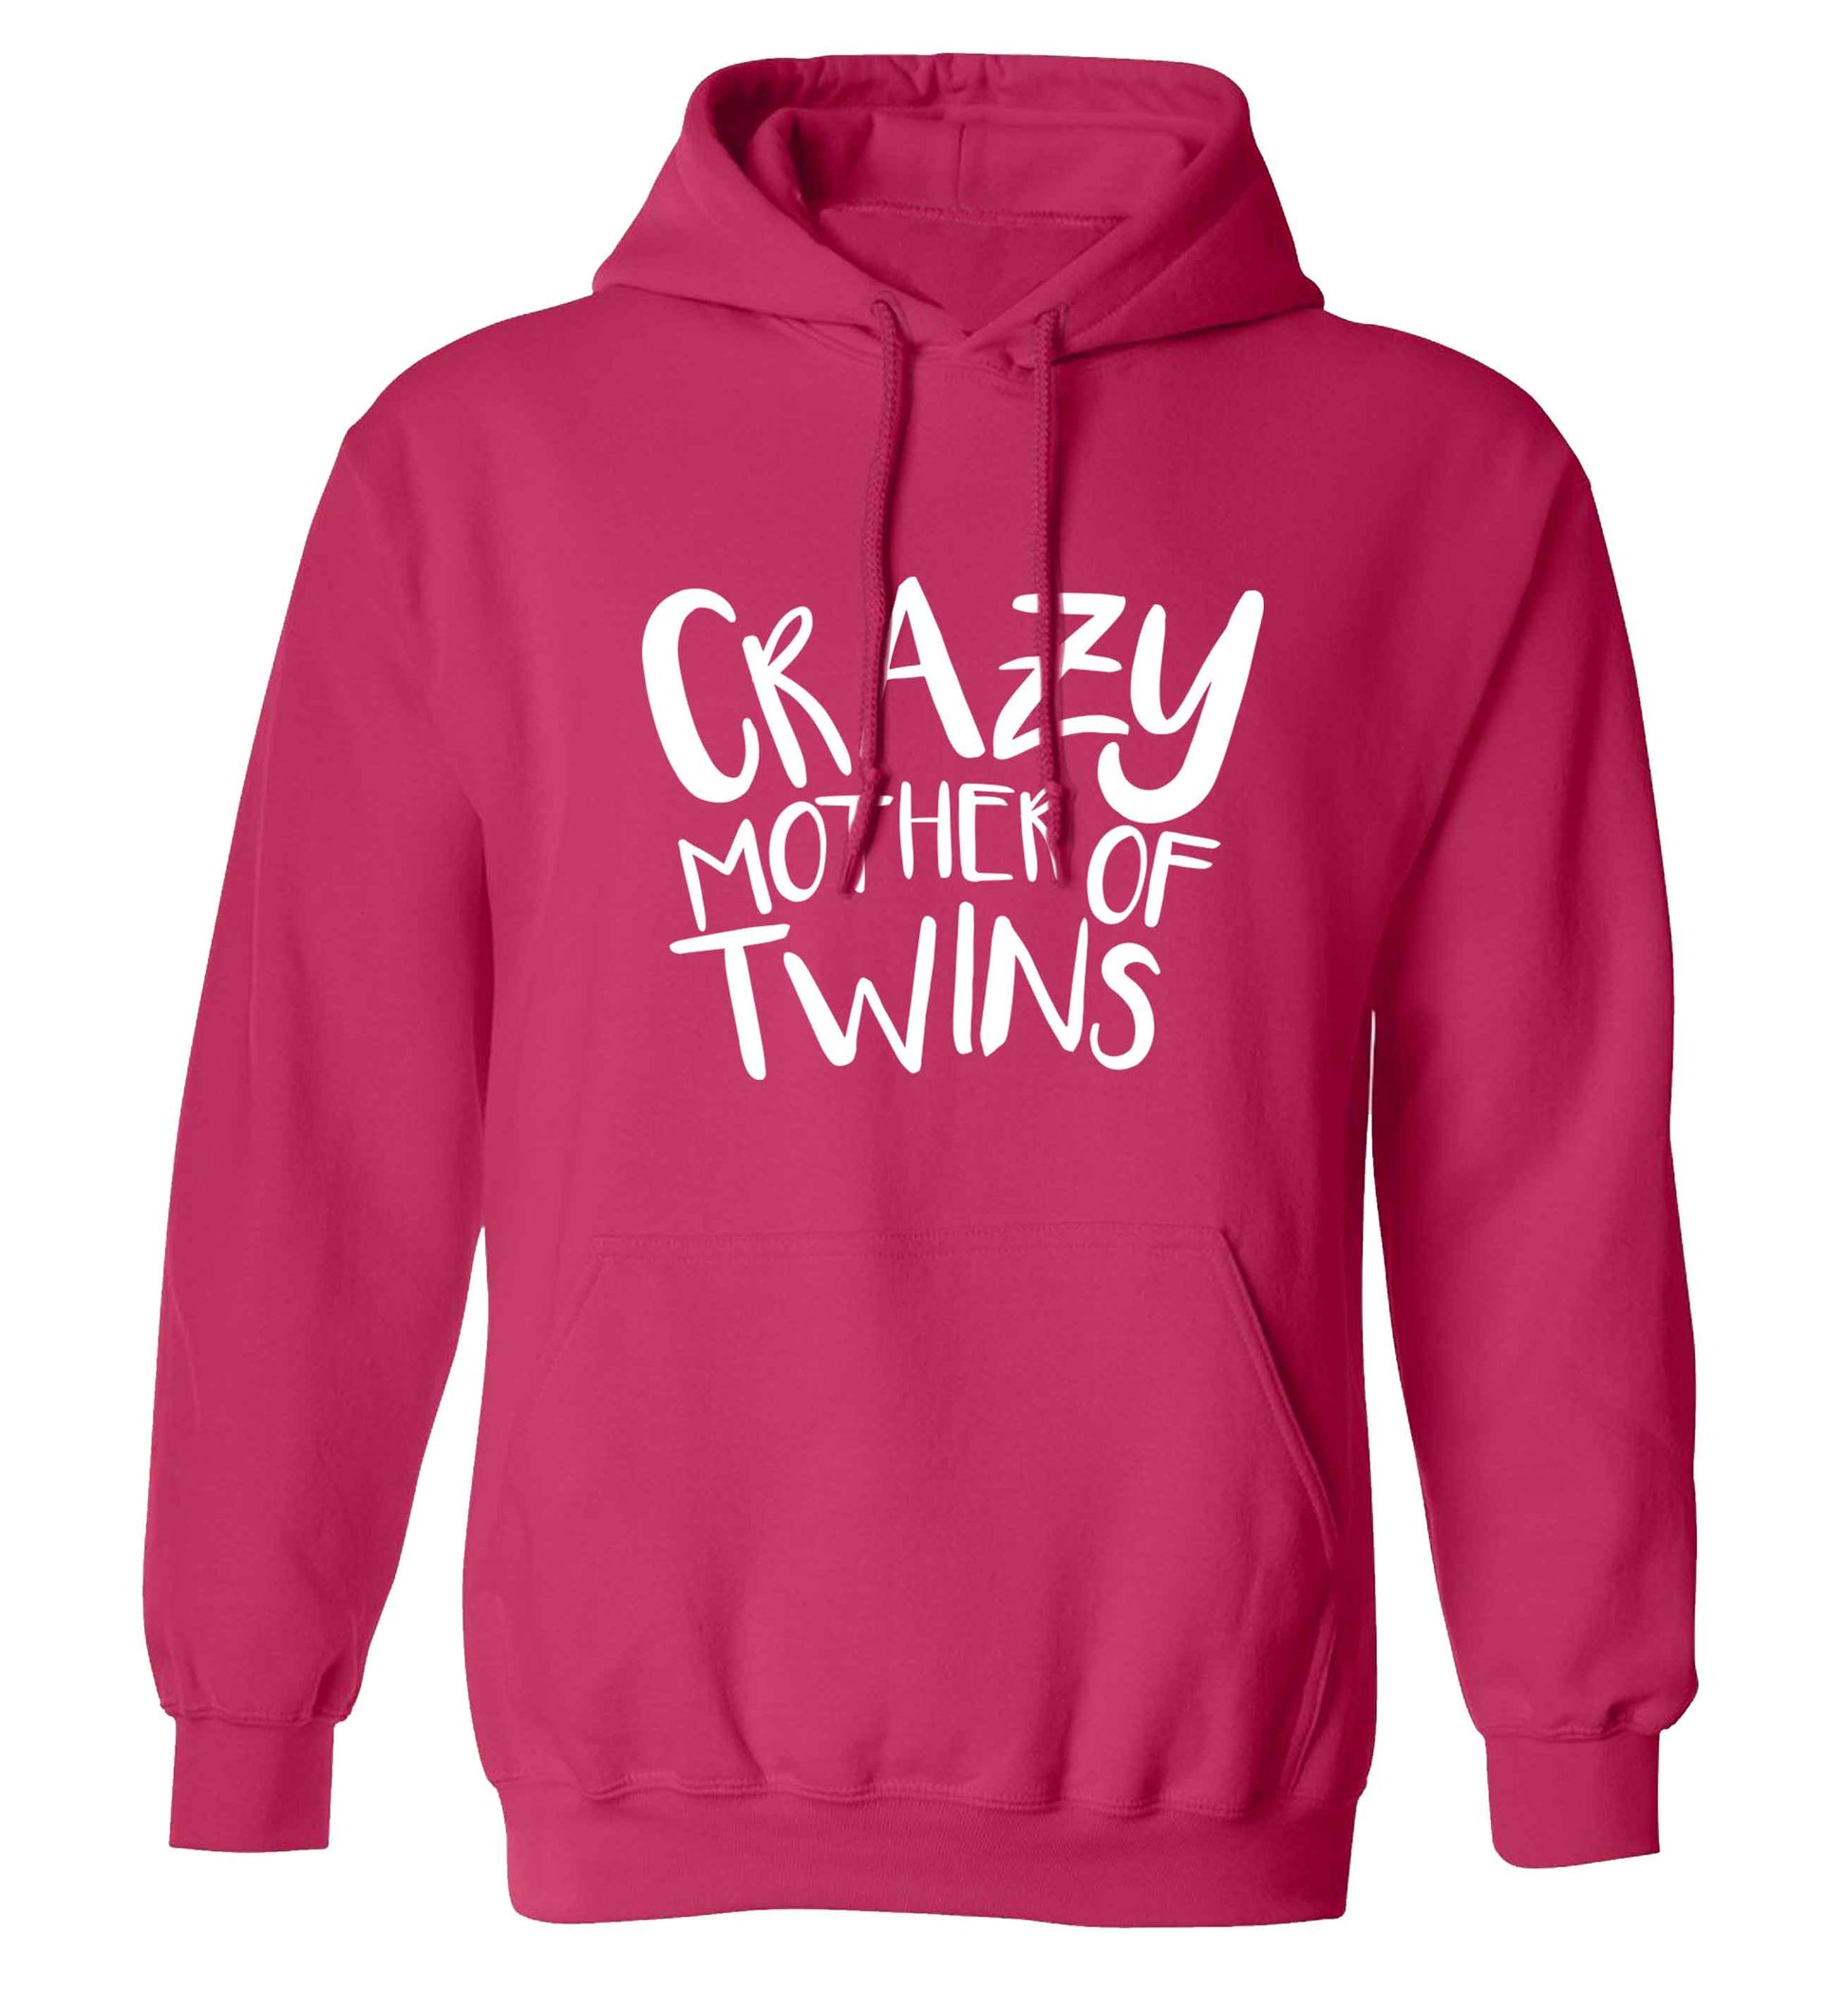 Crazy mother of twins adults unisex pink hoodie 2XL